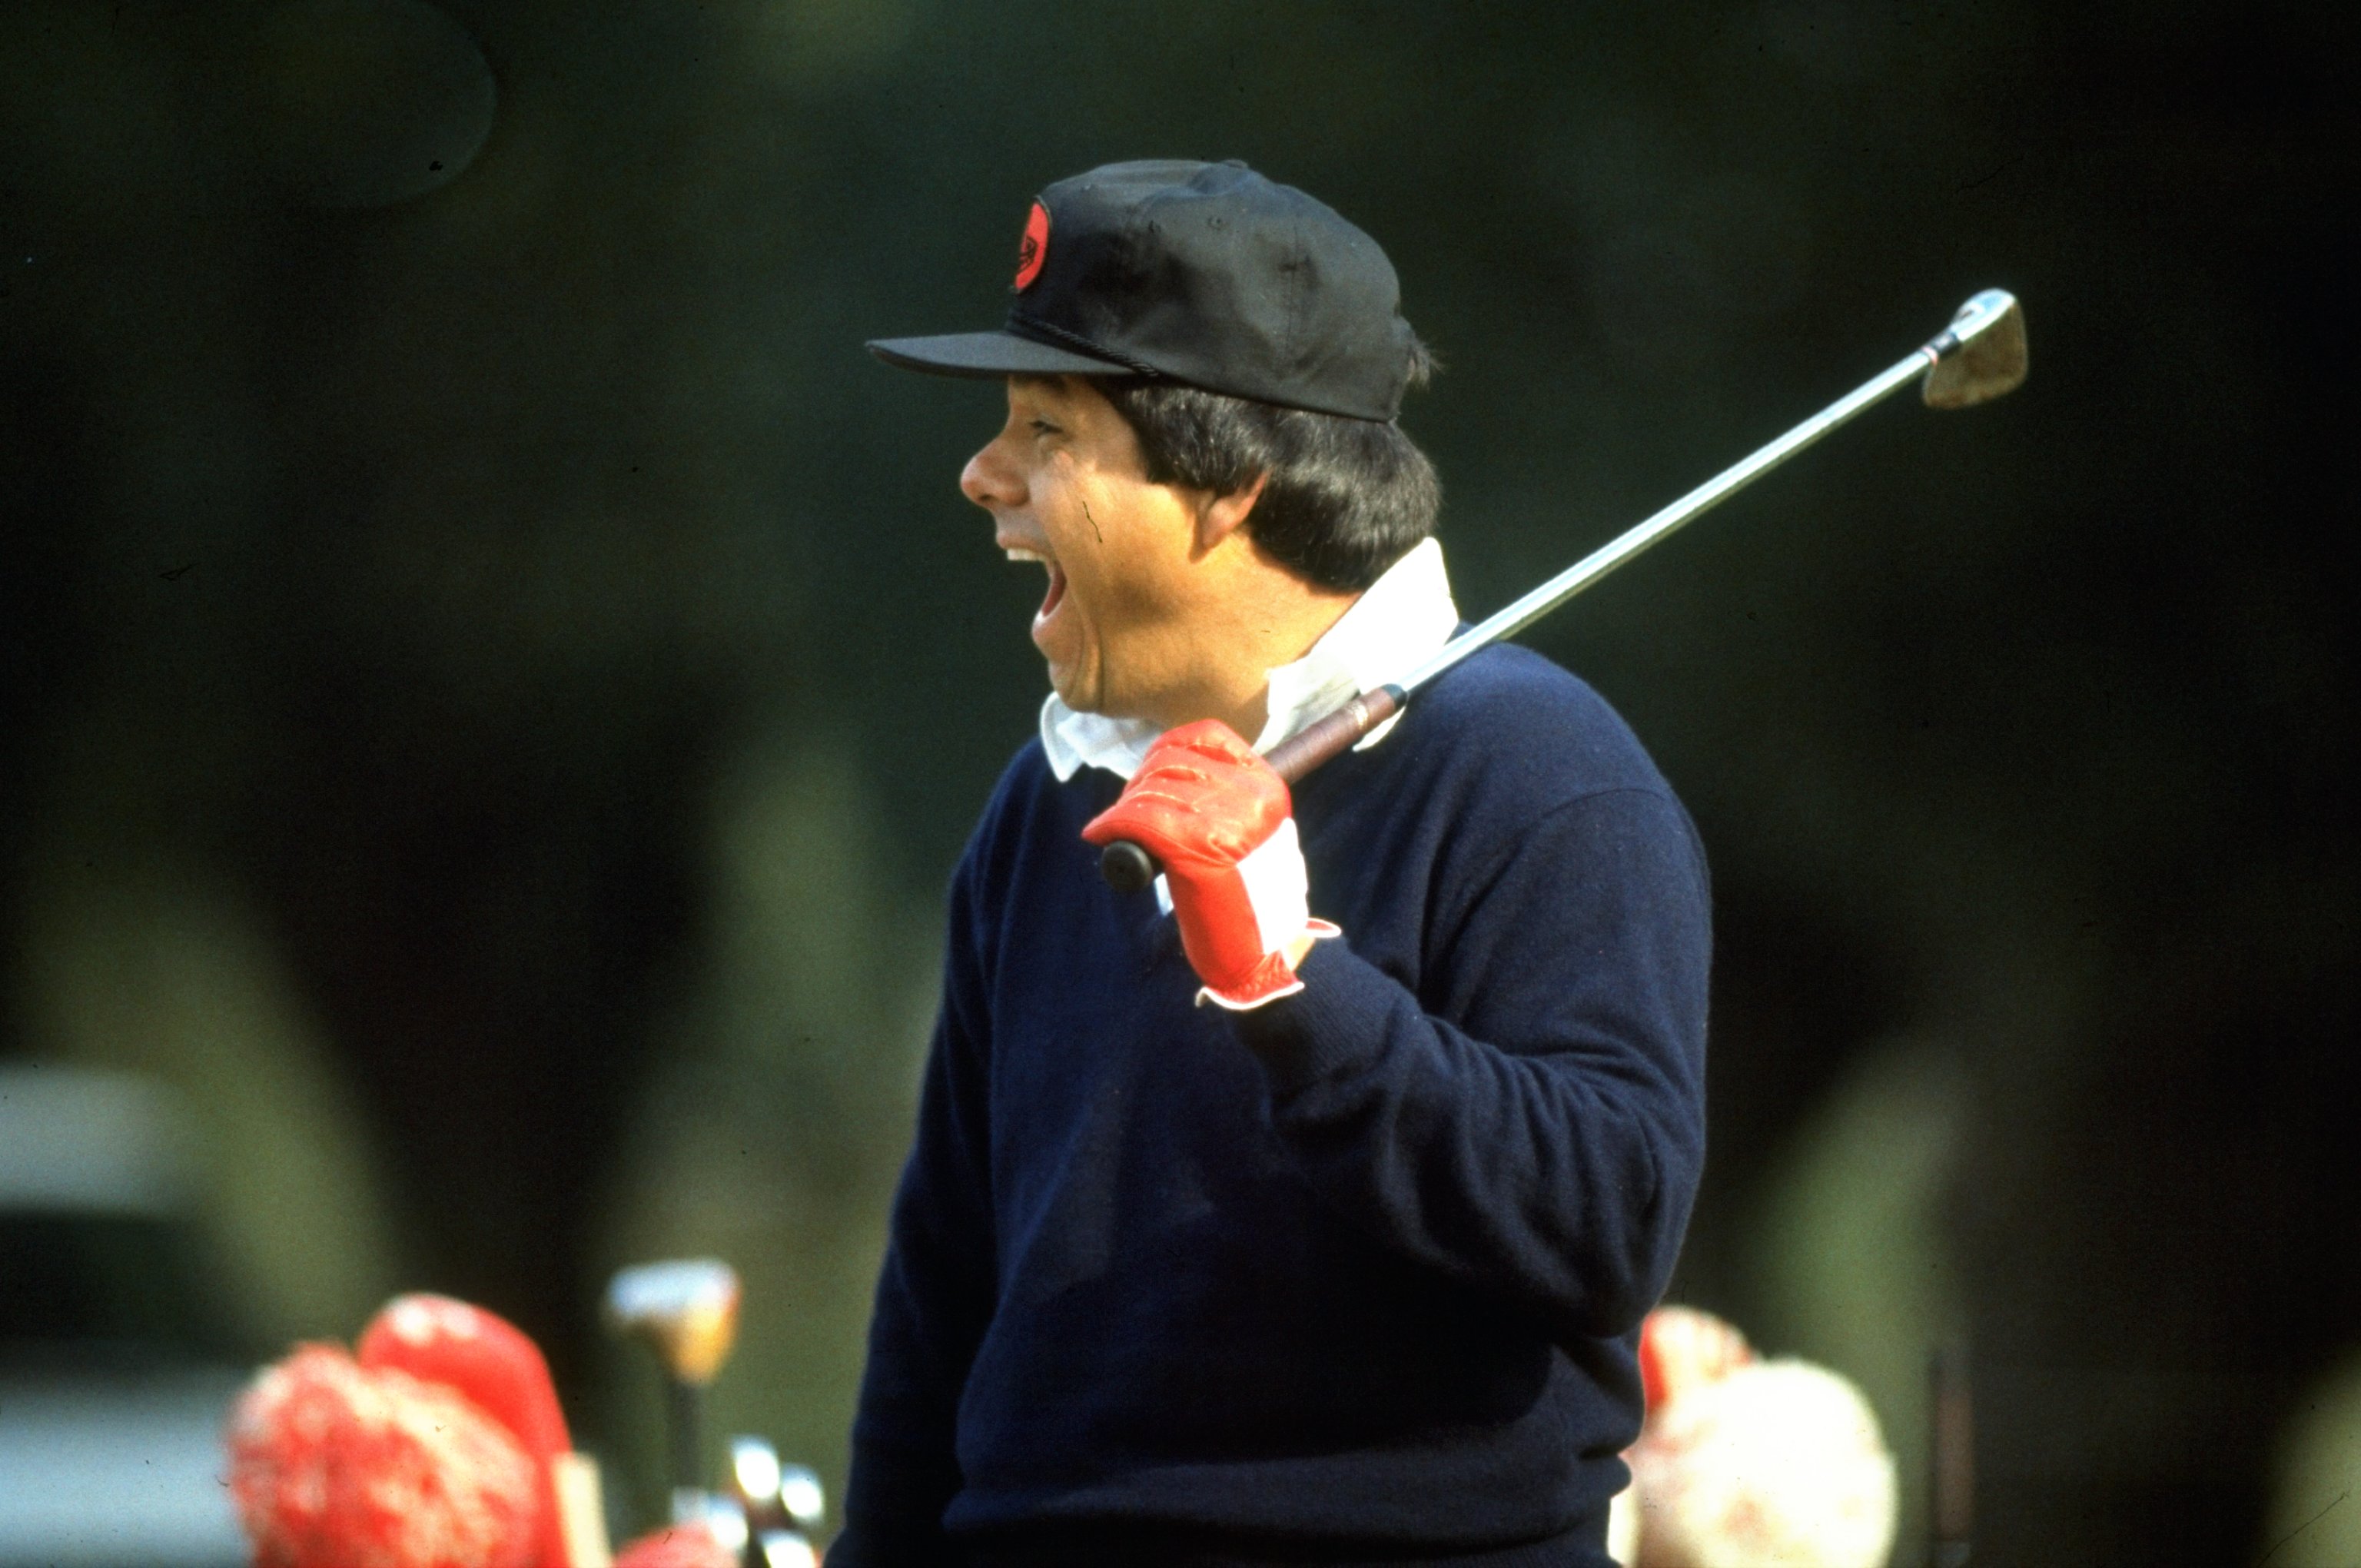 The Top 10 Golfers of the ‘70s